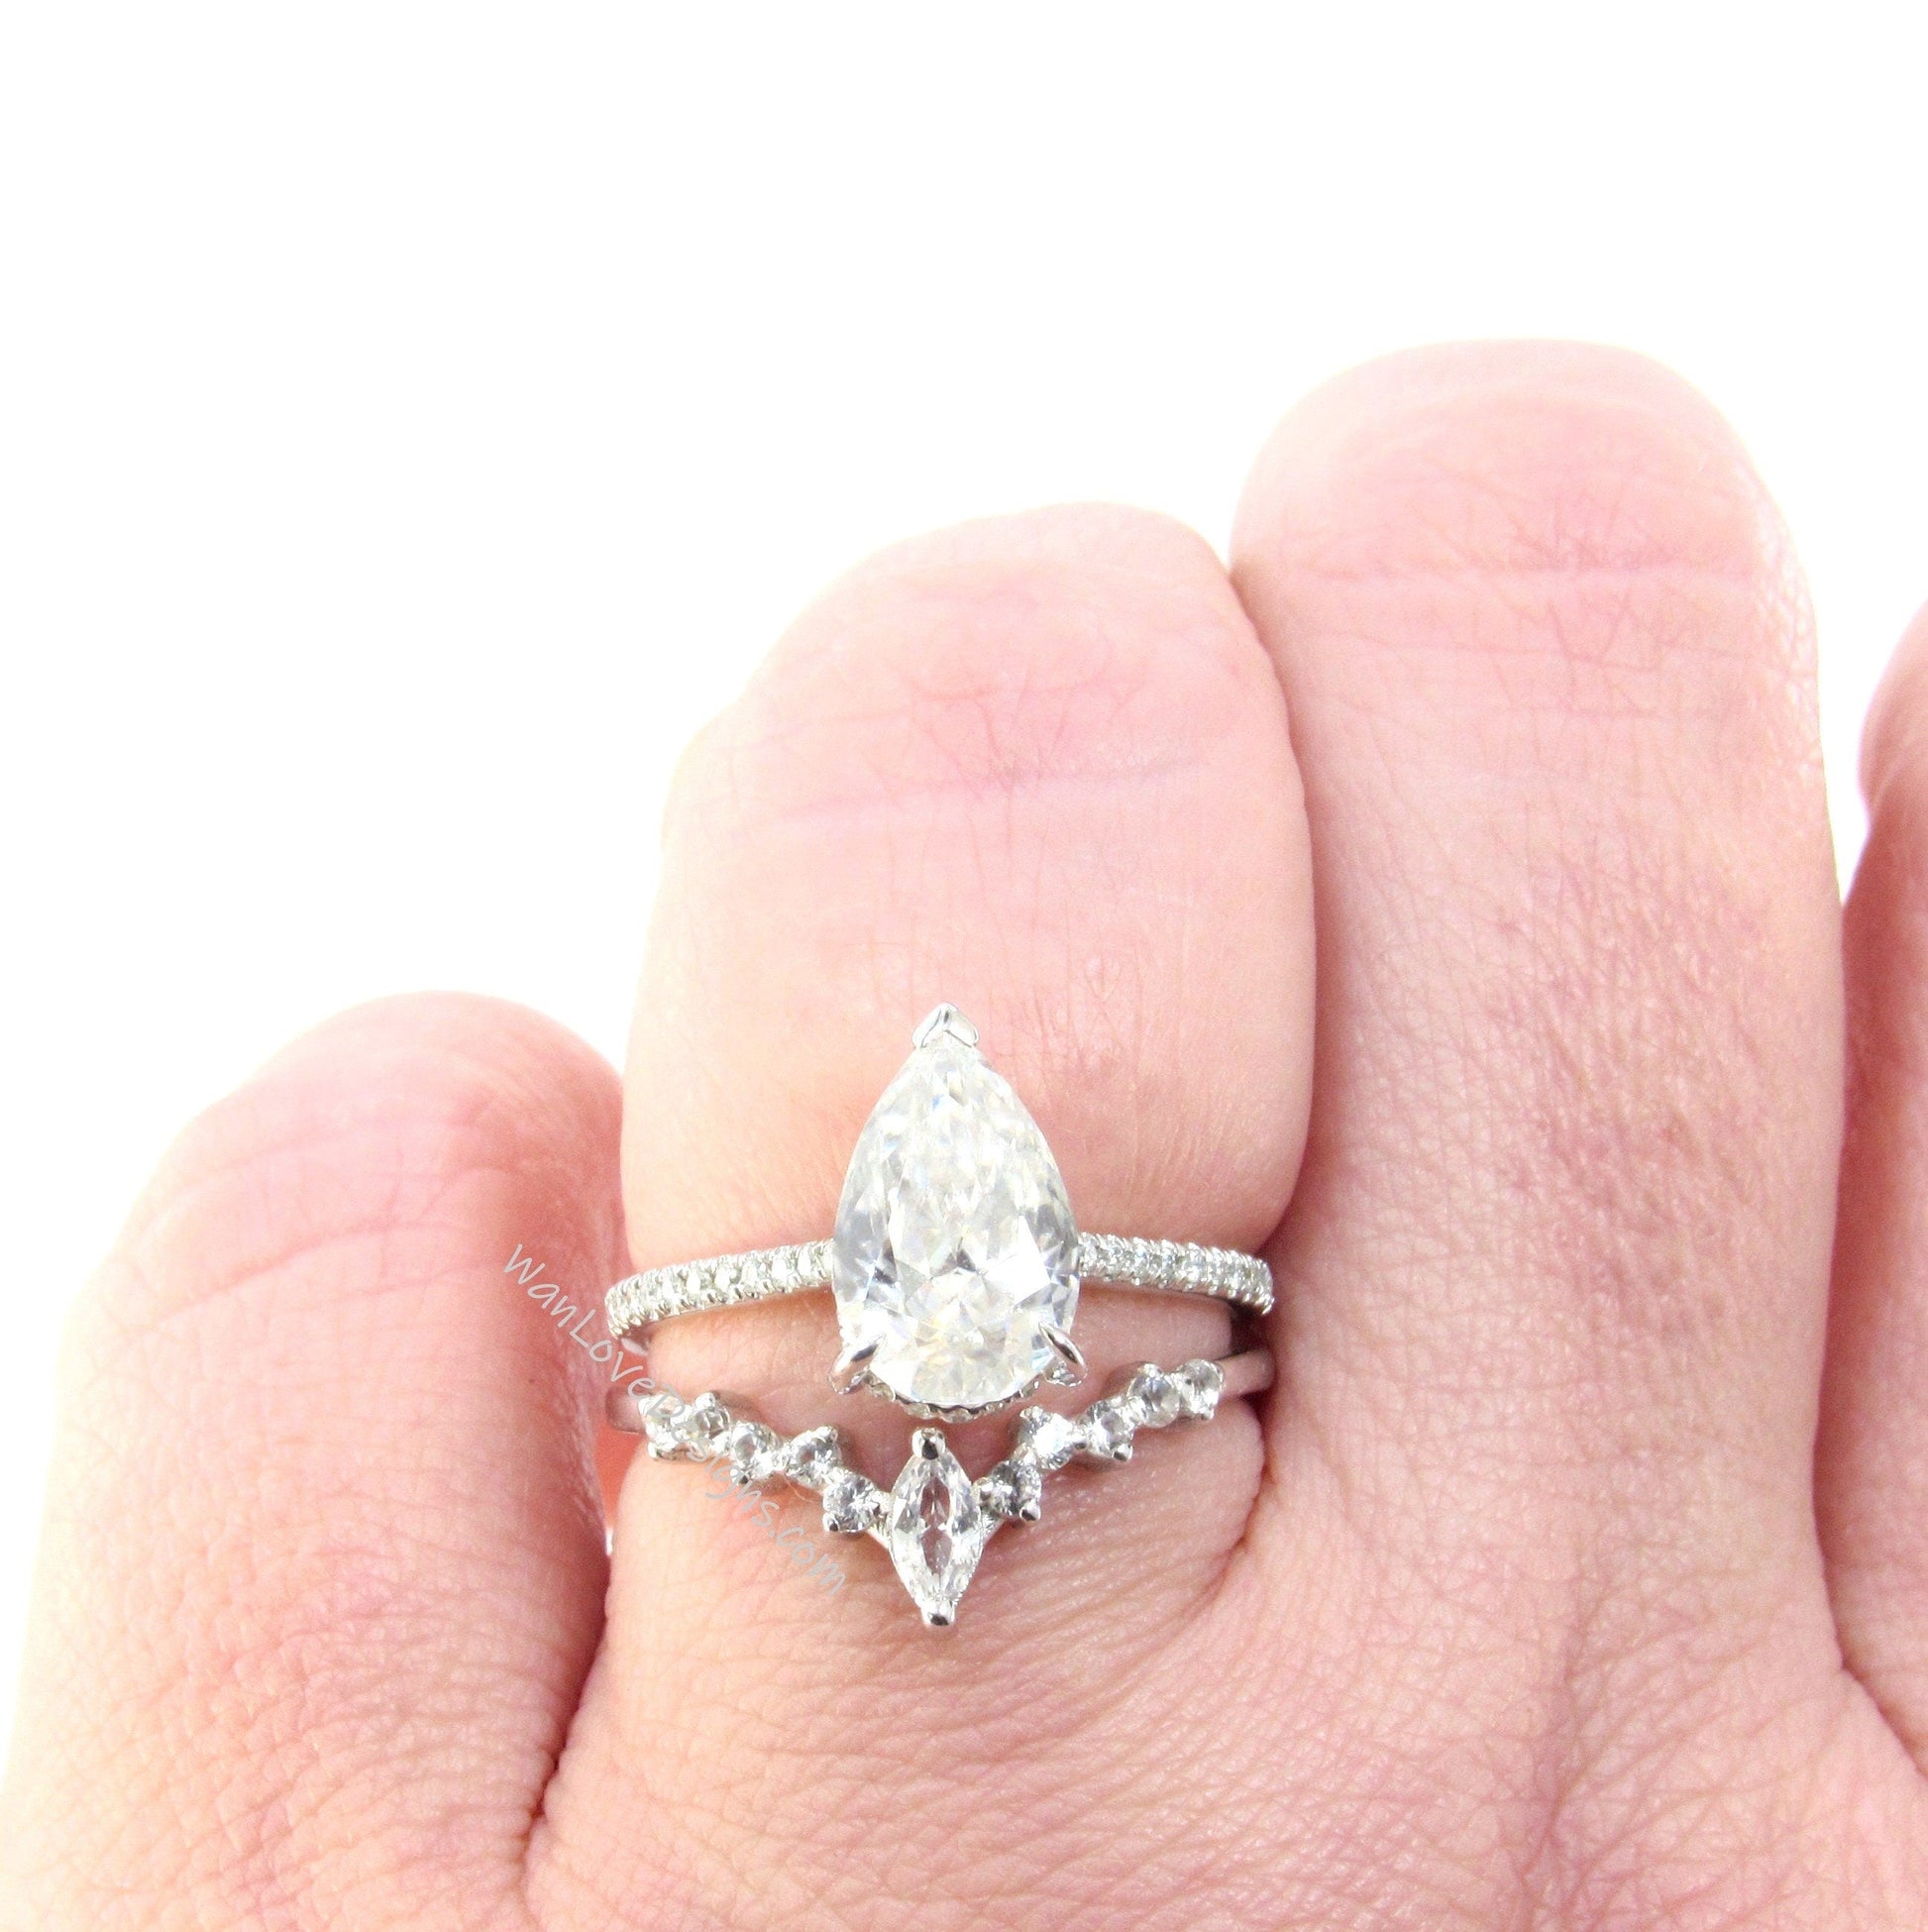 2PCS Moissanite engagement ring white gold Pear shaped Unique Cluster vintage ring vintage Marquise curved nesting wedding band Promise gift Wan Love Designs